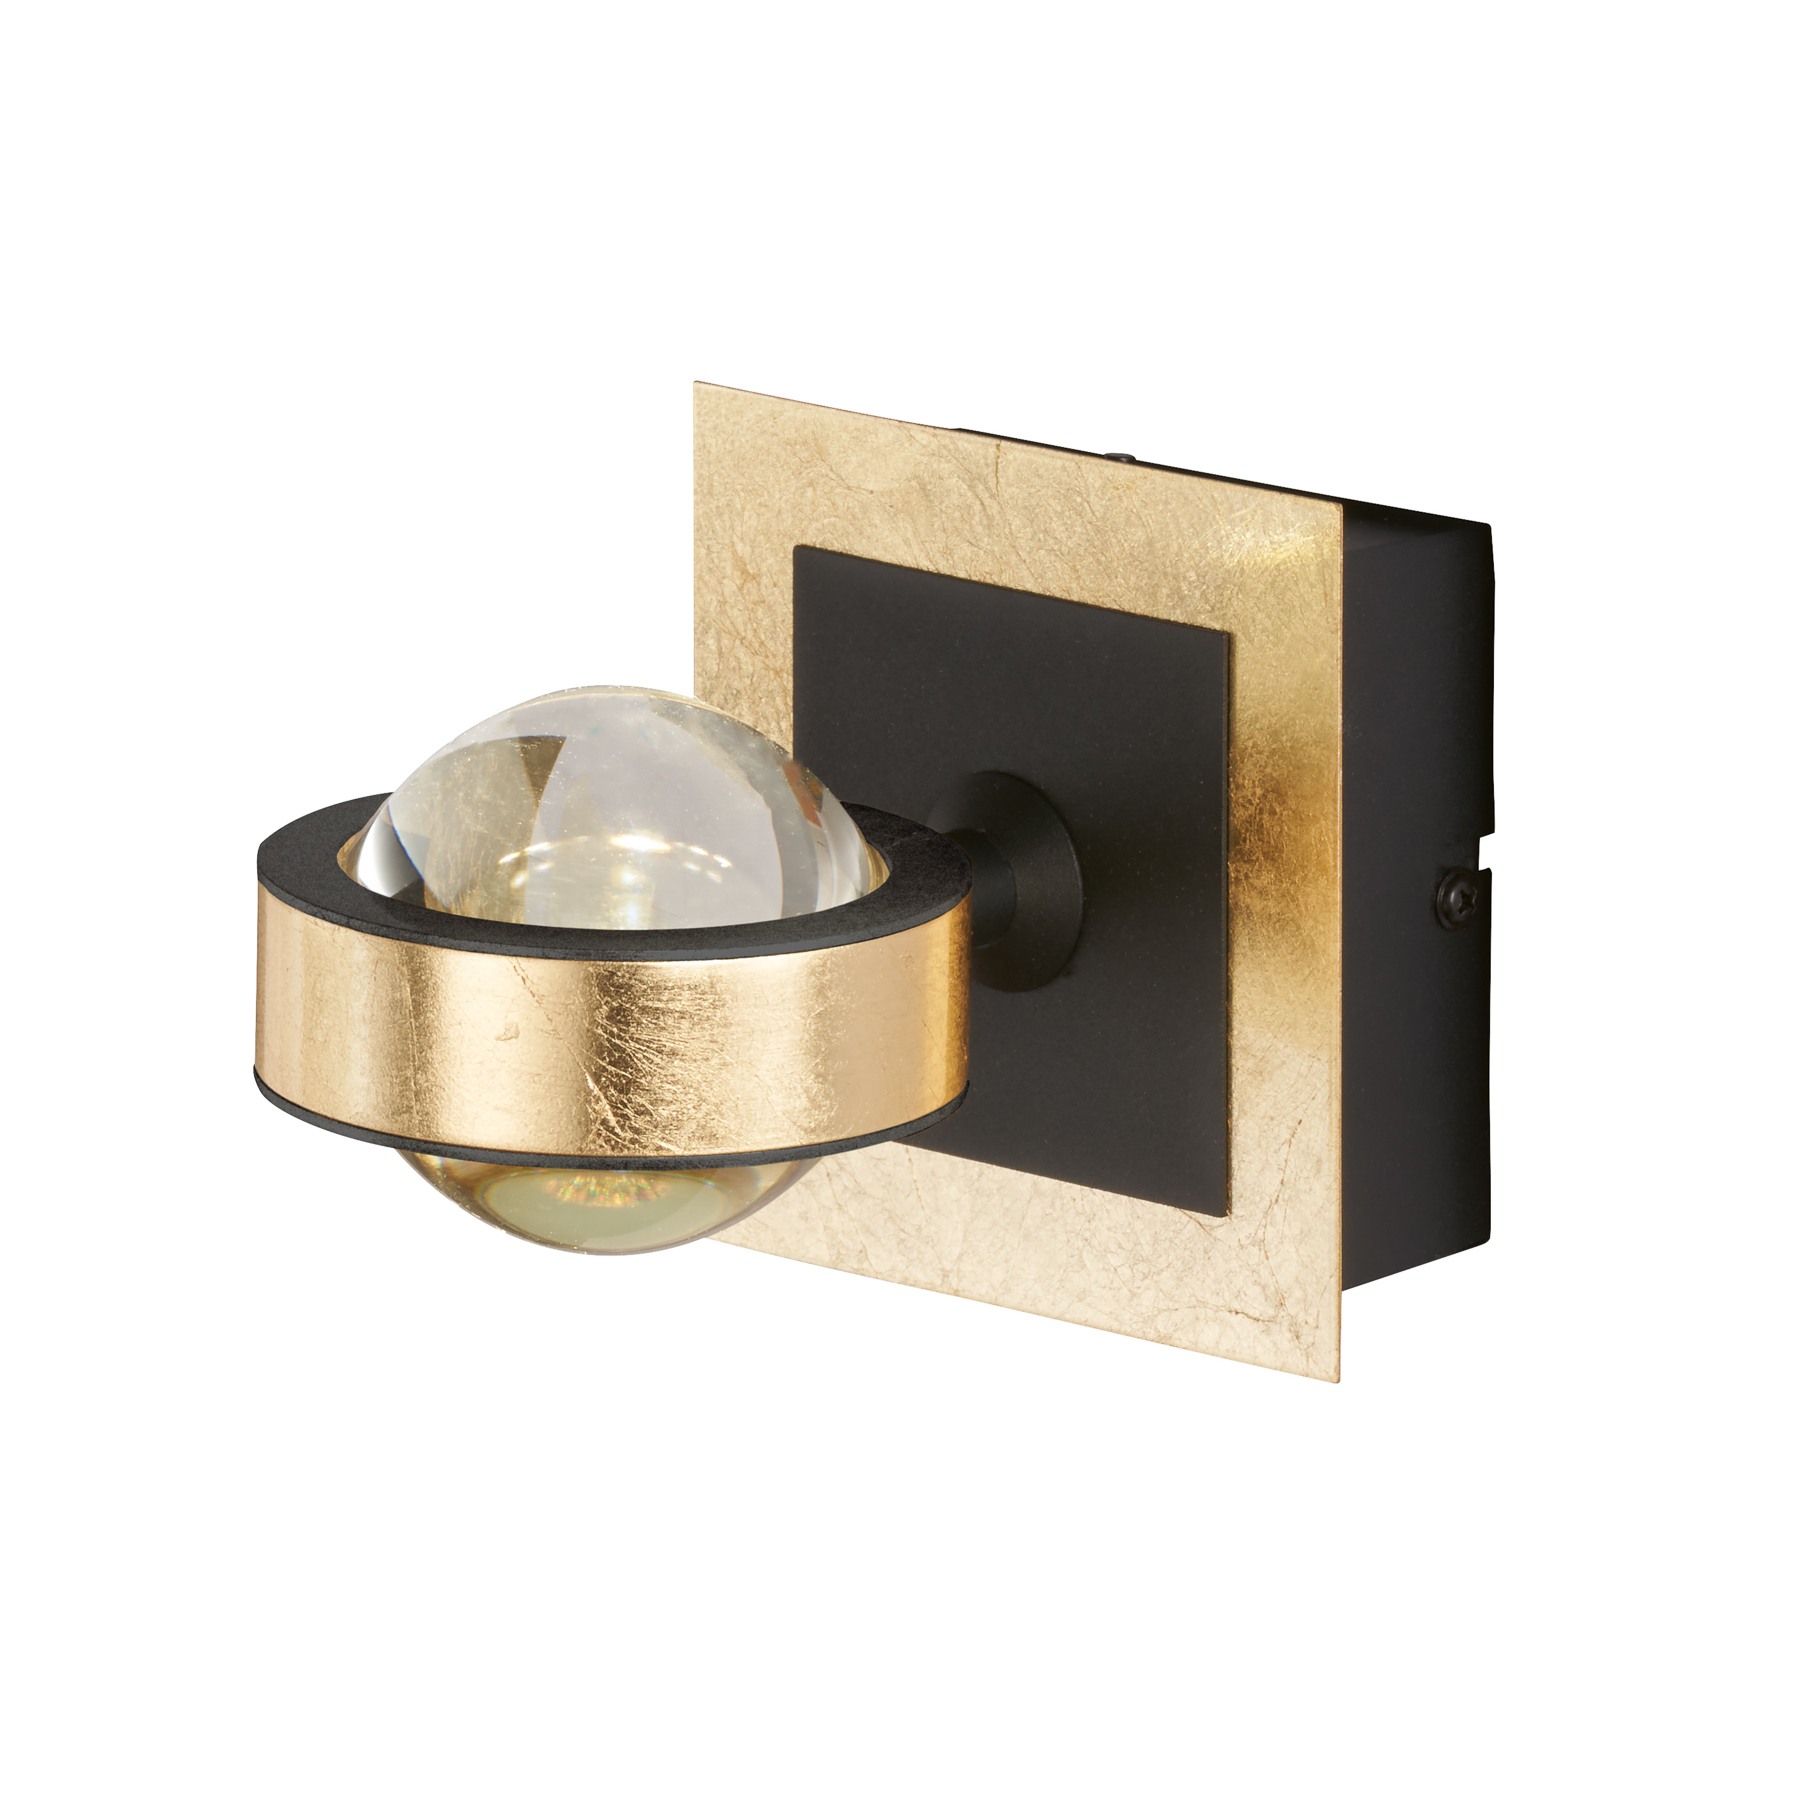 LED wall lamp Cluedo, gold-coloured, width 12 cm, metal, CCT